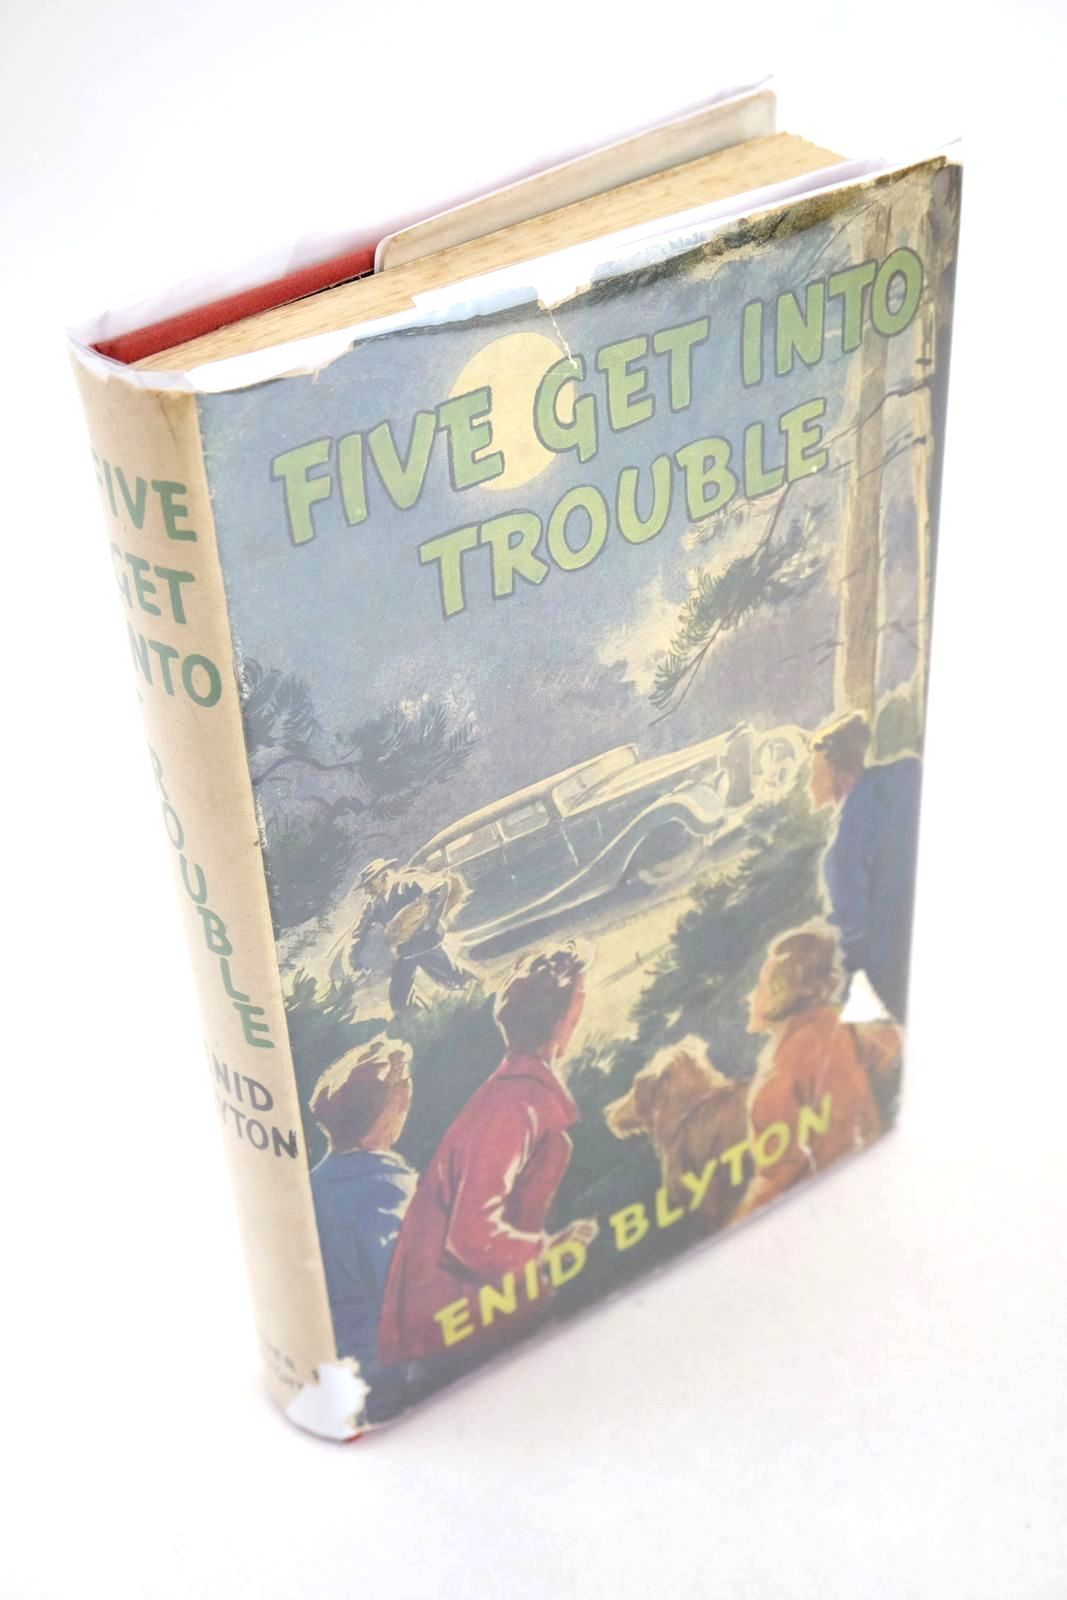 Photo of FIVE GET INTO TROUBLE written by Blyton, Enid illustrated by Soper, Eileen published by Hodder & Stoughton (STOCK CODE: 1326258)  for sale by Stella & Rose's Books